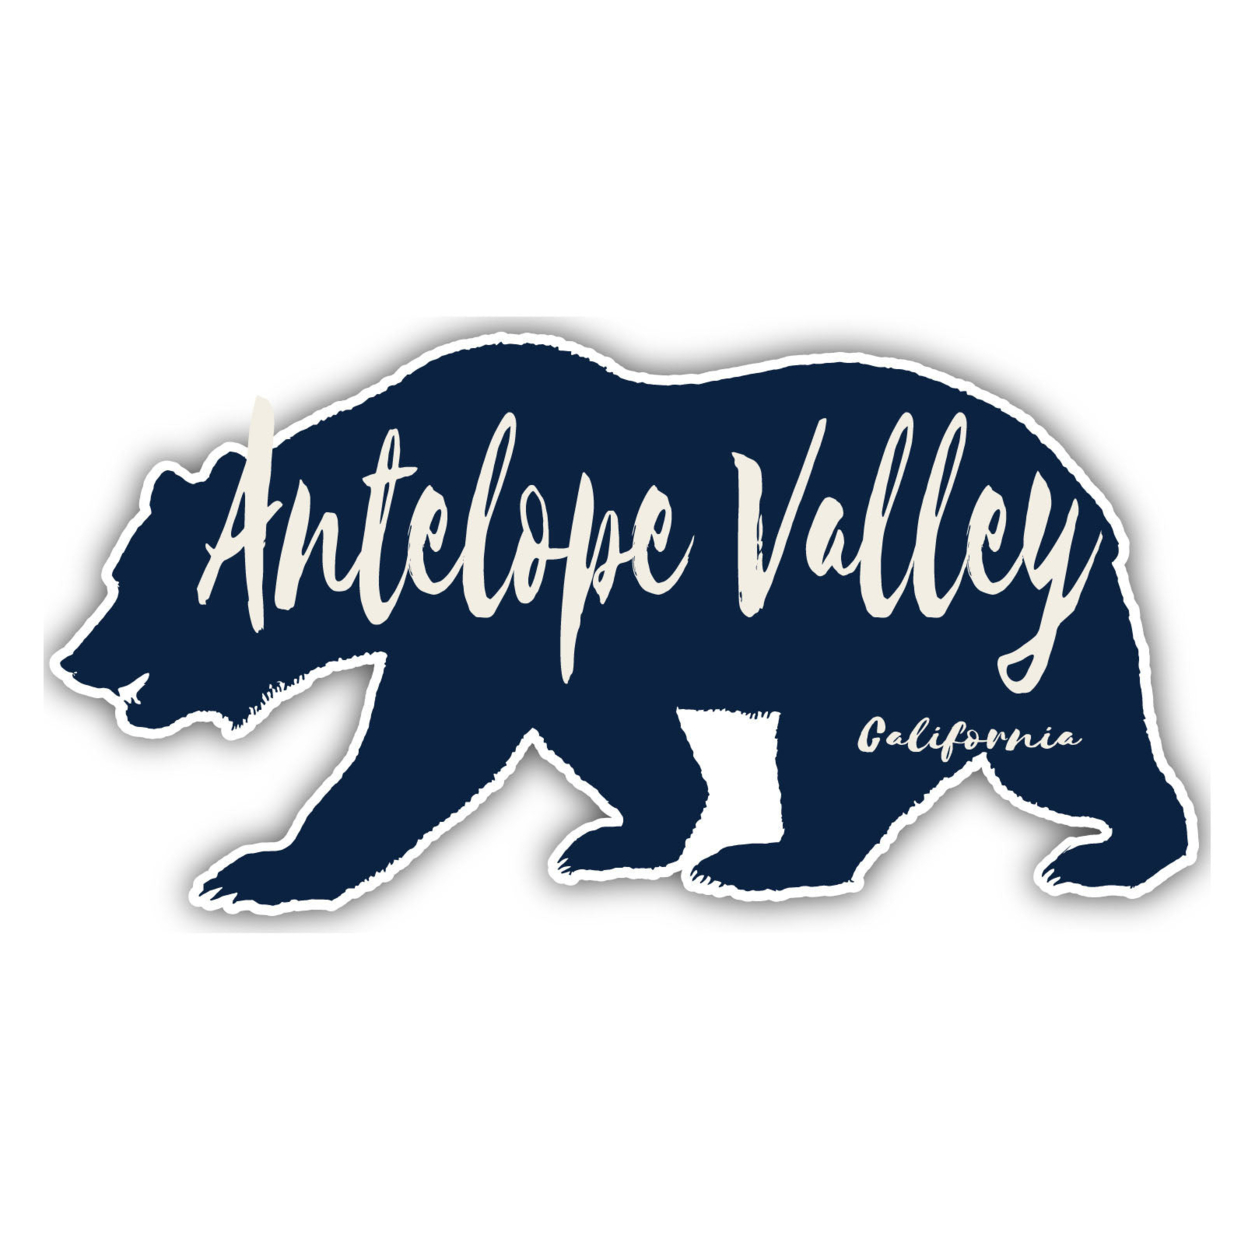 Antelope Valley California Souvenir Decorative Stickers (Choose Theme And Size) - 4-Pack, 12-Inch, Bear